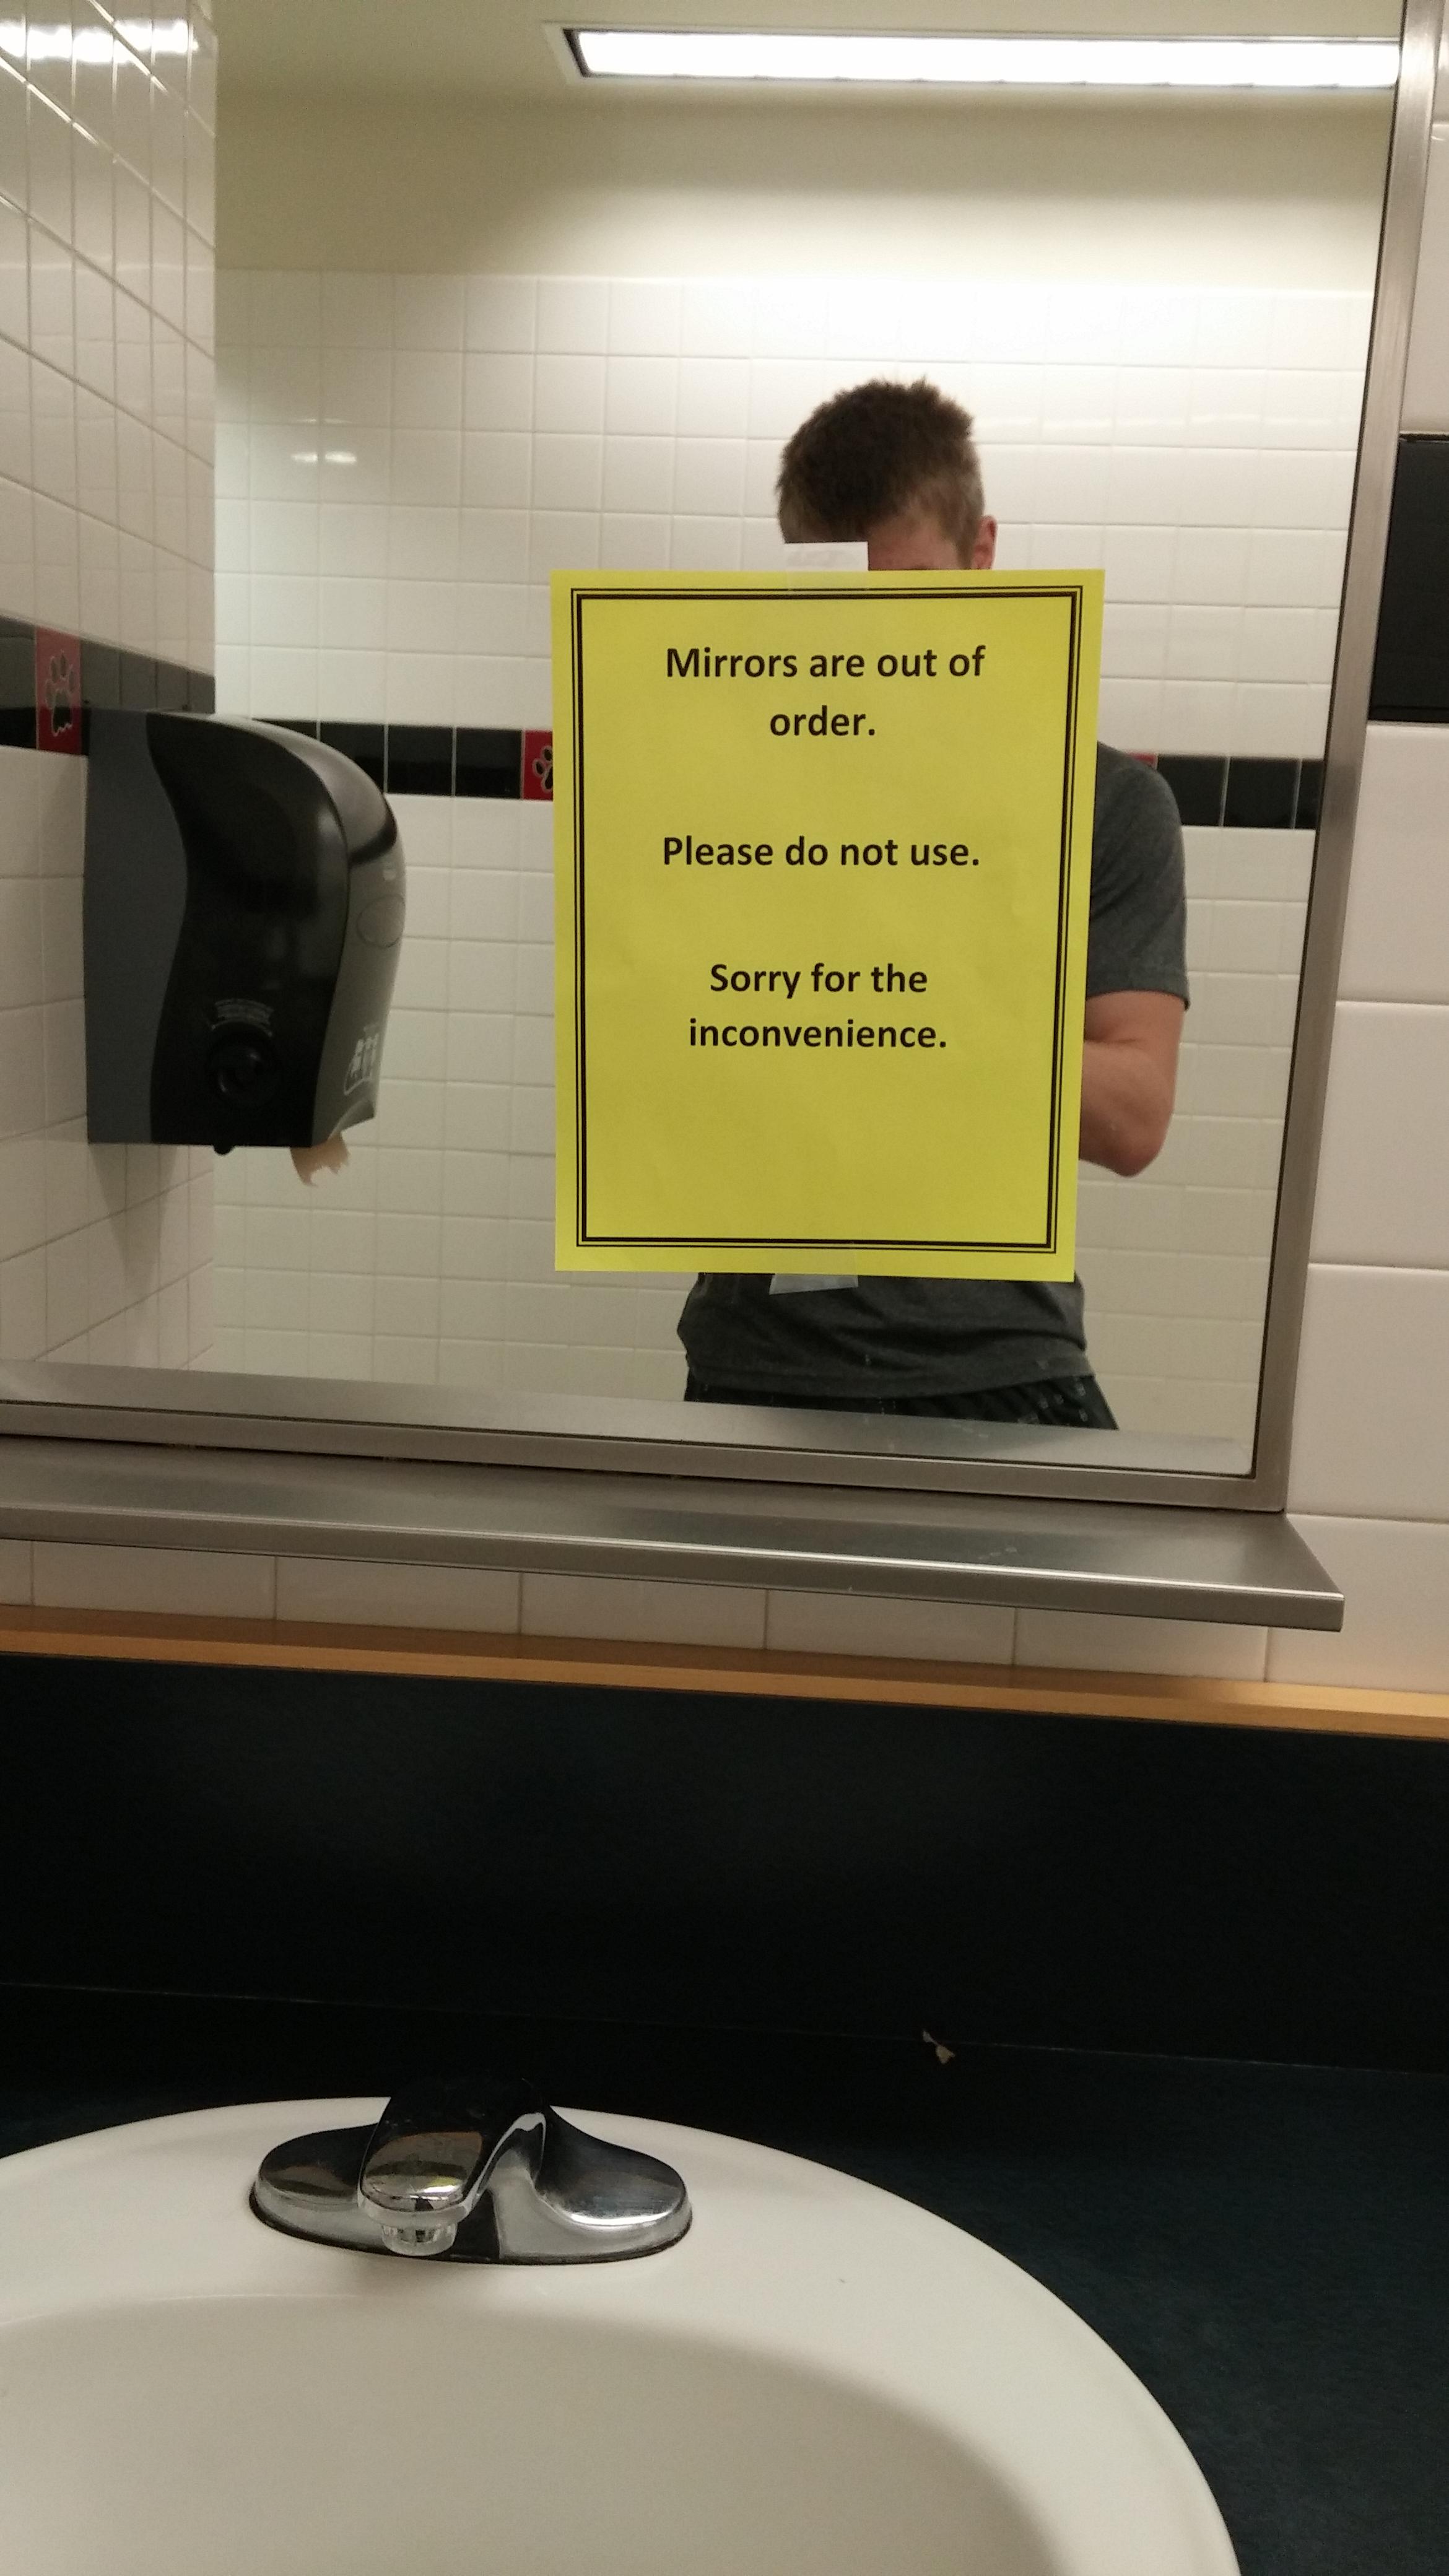 funny things to put in bathroom - Mirrors are out of order, Please do not use. Sorry for the